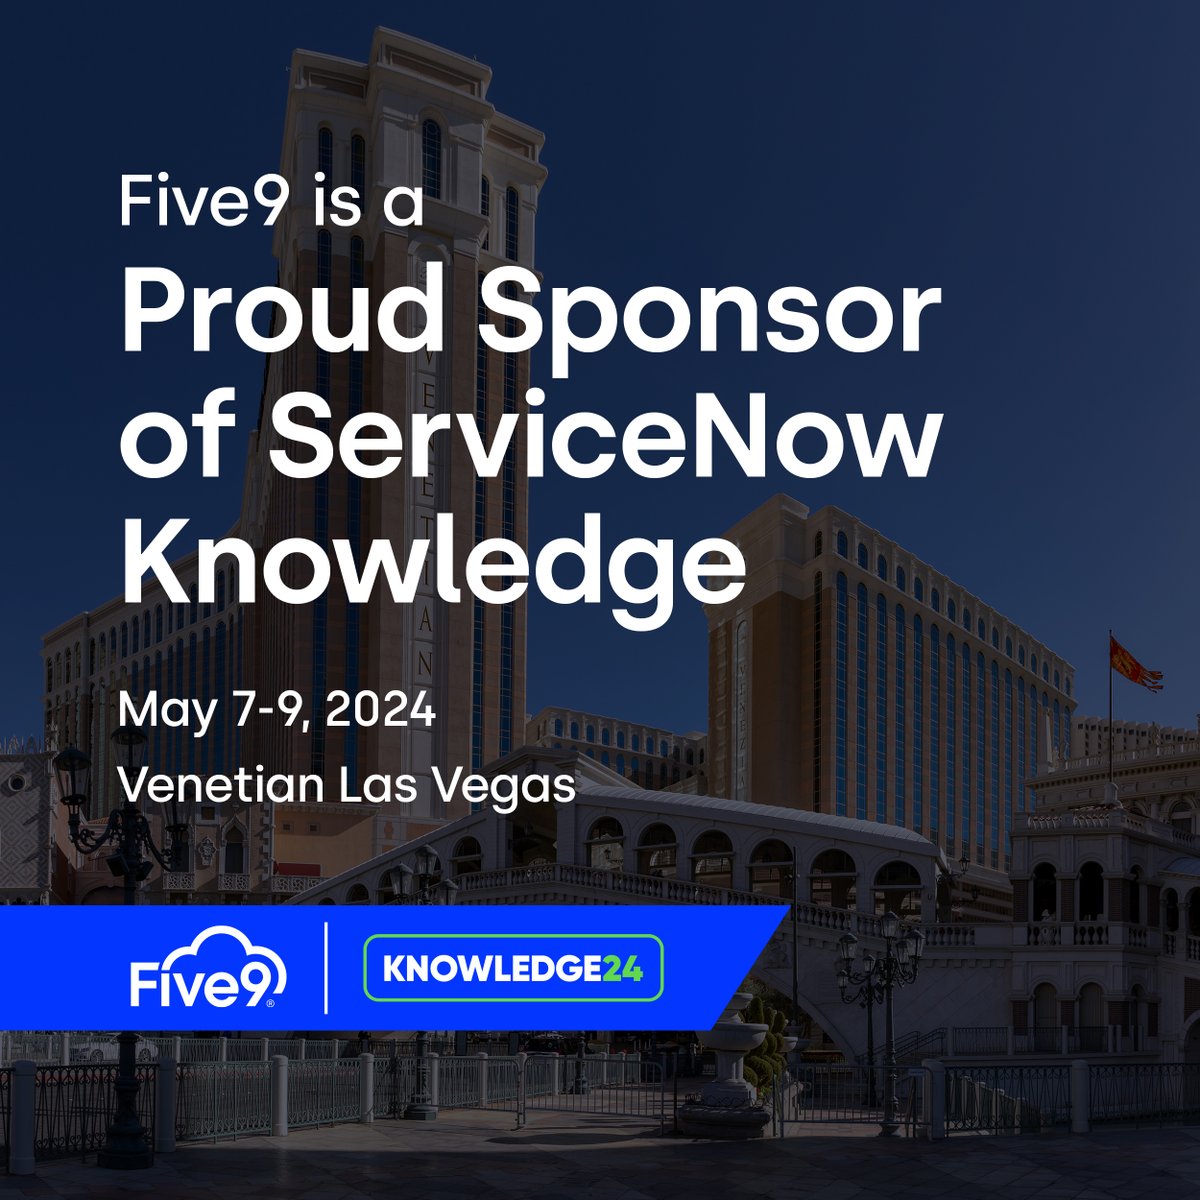 We're a proud sponsor of @ServiceNow #Knowledge24. Join us at booth 5447 to learn how to bring the power of people, technology, and partners to deliver an industry leading #CX. See you there. #PartnerPowered spr.ly/6012b5uw4